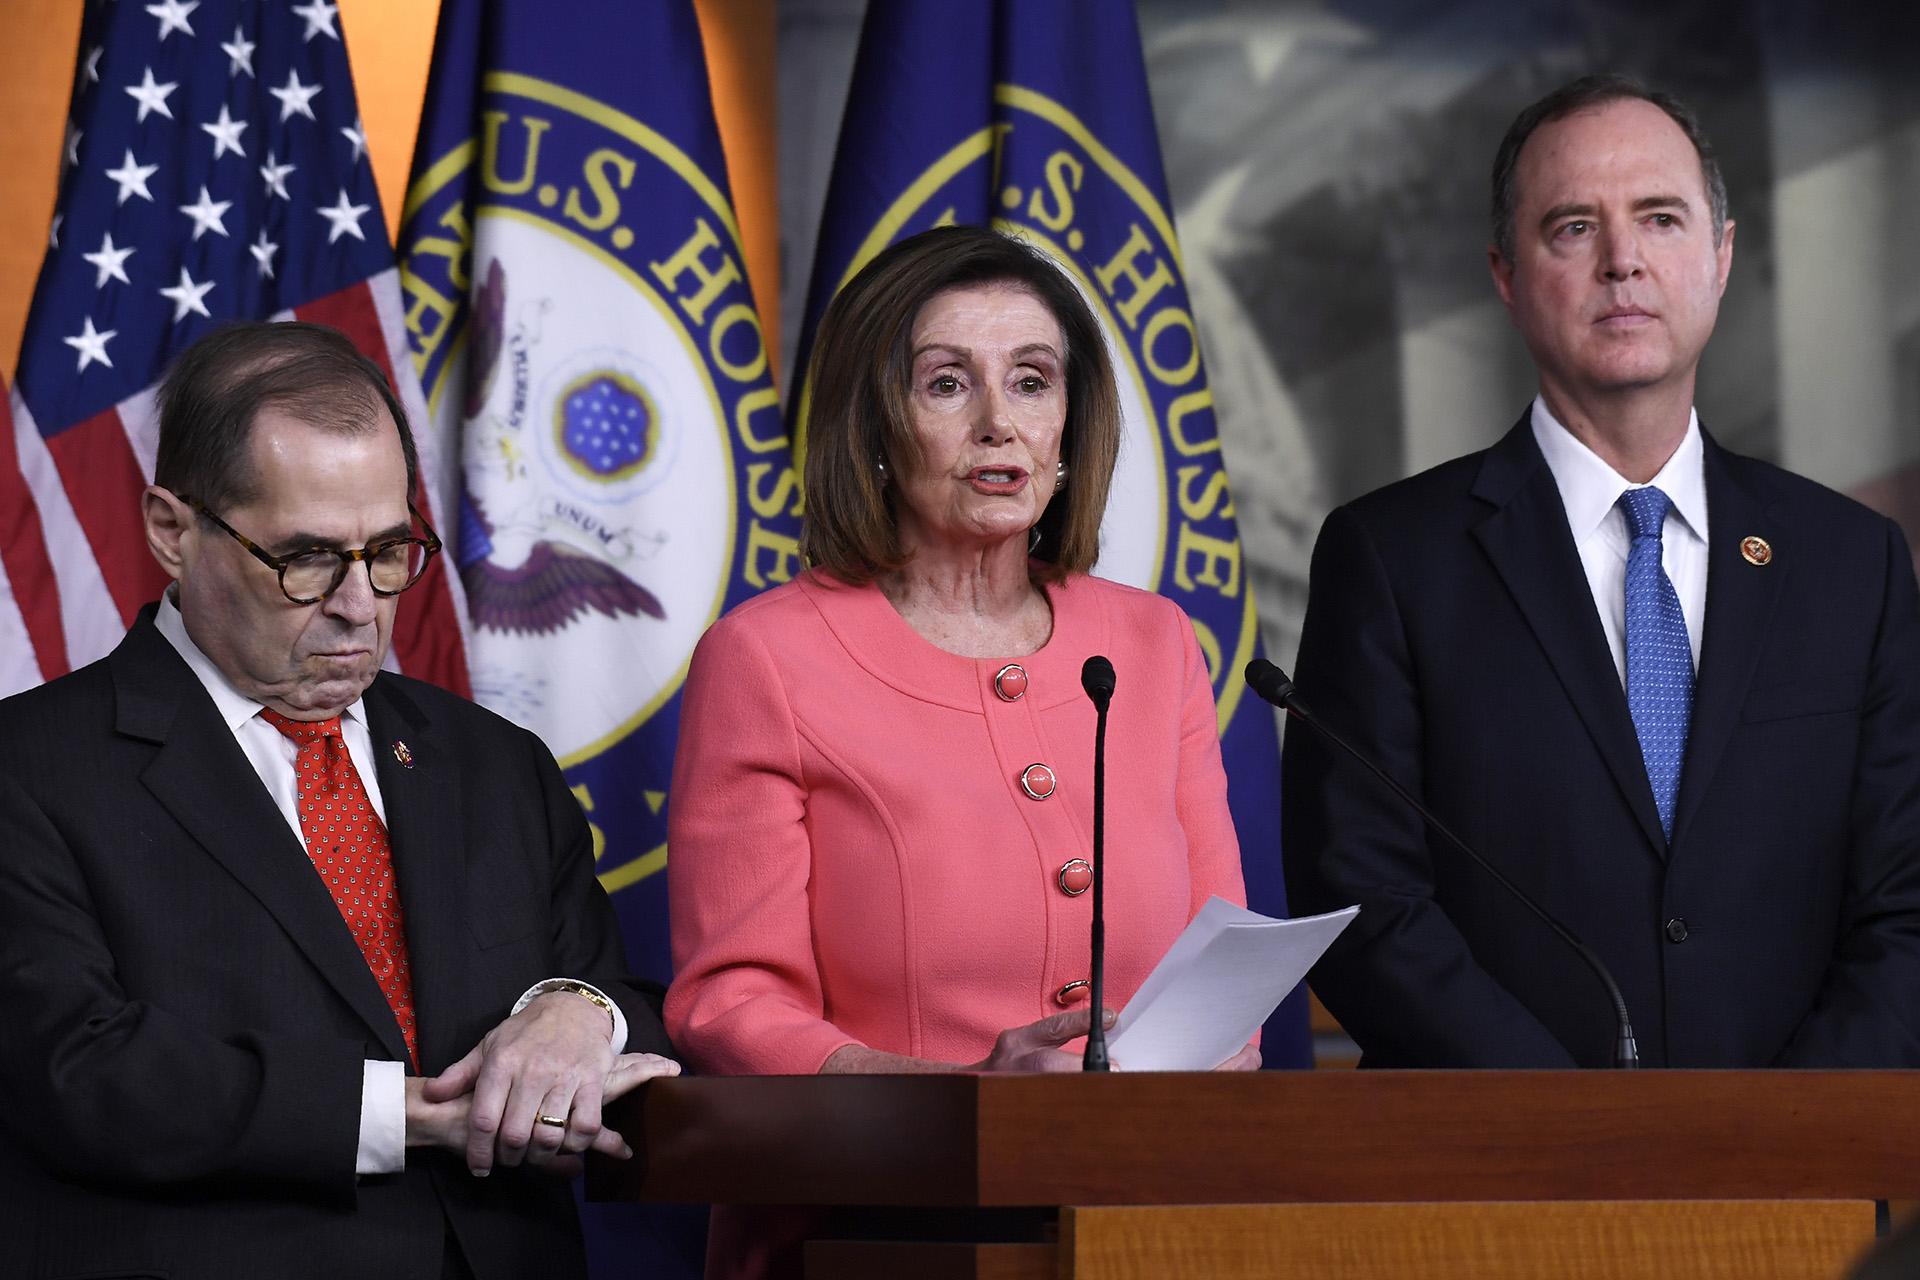 House Speaker Nancy Pelosi of Calif., center, flanked by House Judiciary Committee Chairman Rep. Jerrold Nadler, D-N.Y., left, and House Intelligence Committee Chairman Rep. Adam Schiff, D-Calif., speaks during a news conference to announce impeachment managers on Capitol Hill in Washington, Wednesday, Jan. 15, 2020. (AP Photo / Susan Walsh)